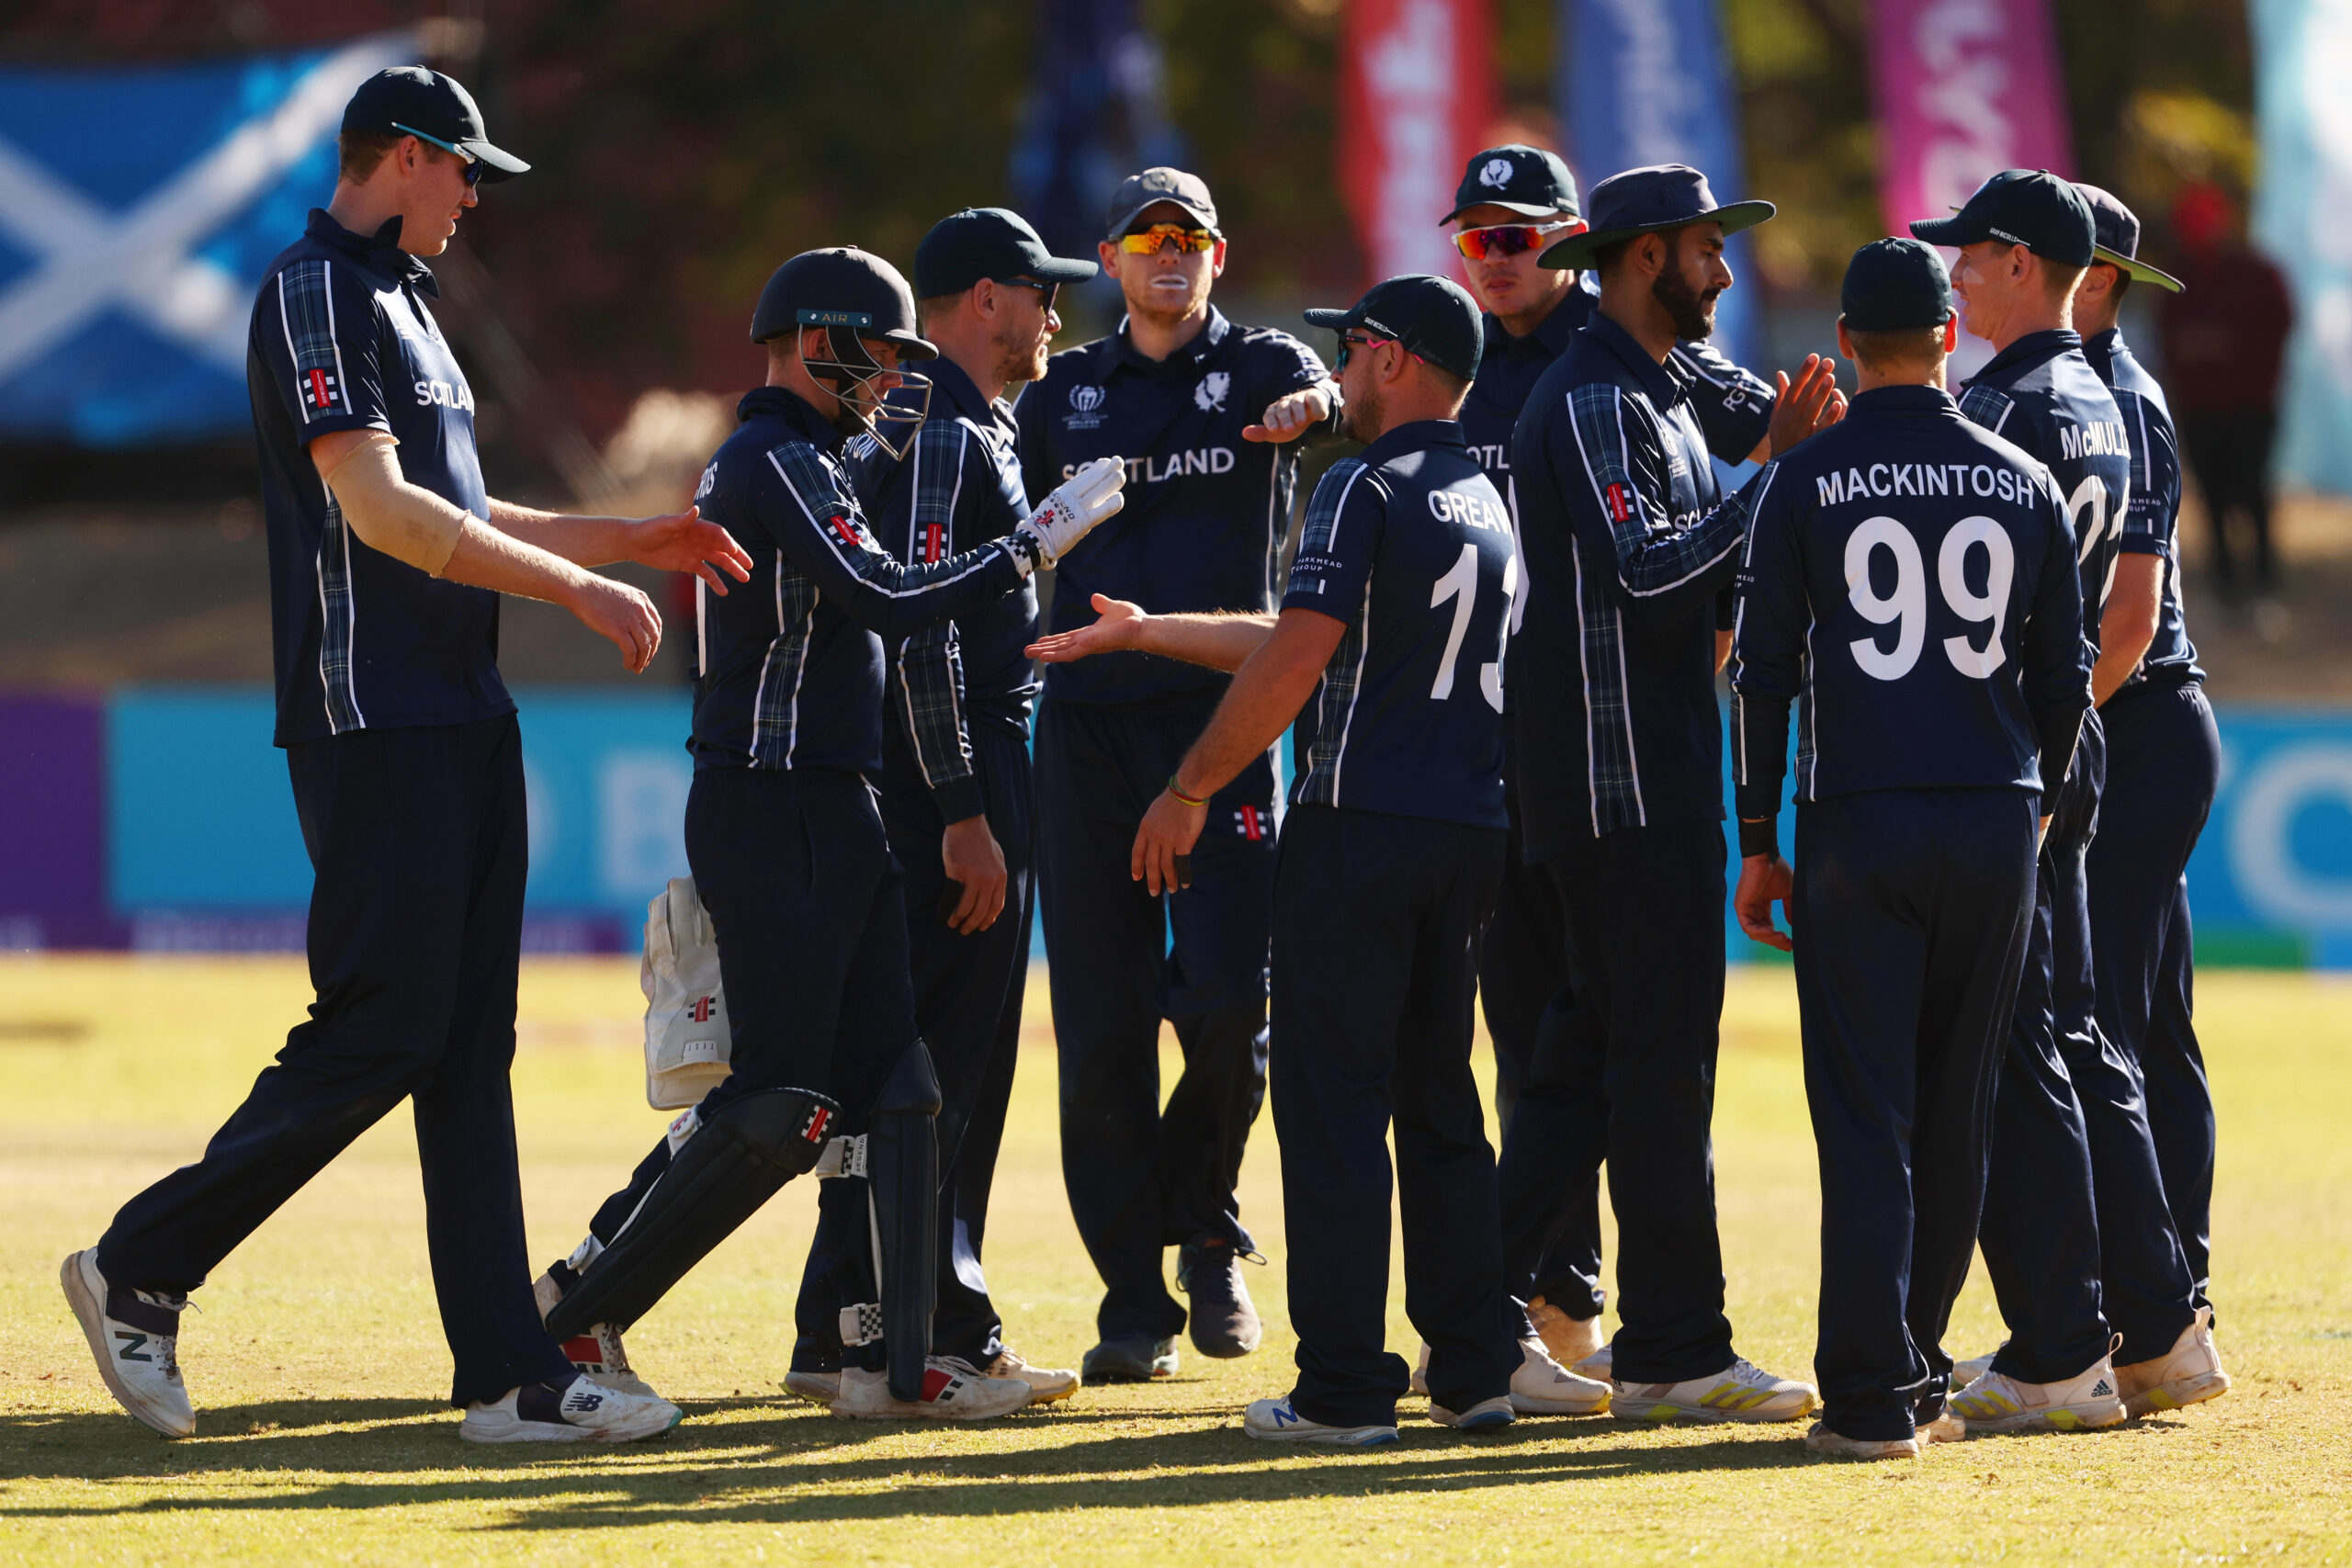 SCOTS OVERWHELM OMAN TO REACH SUPER SIX STAGE